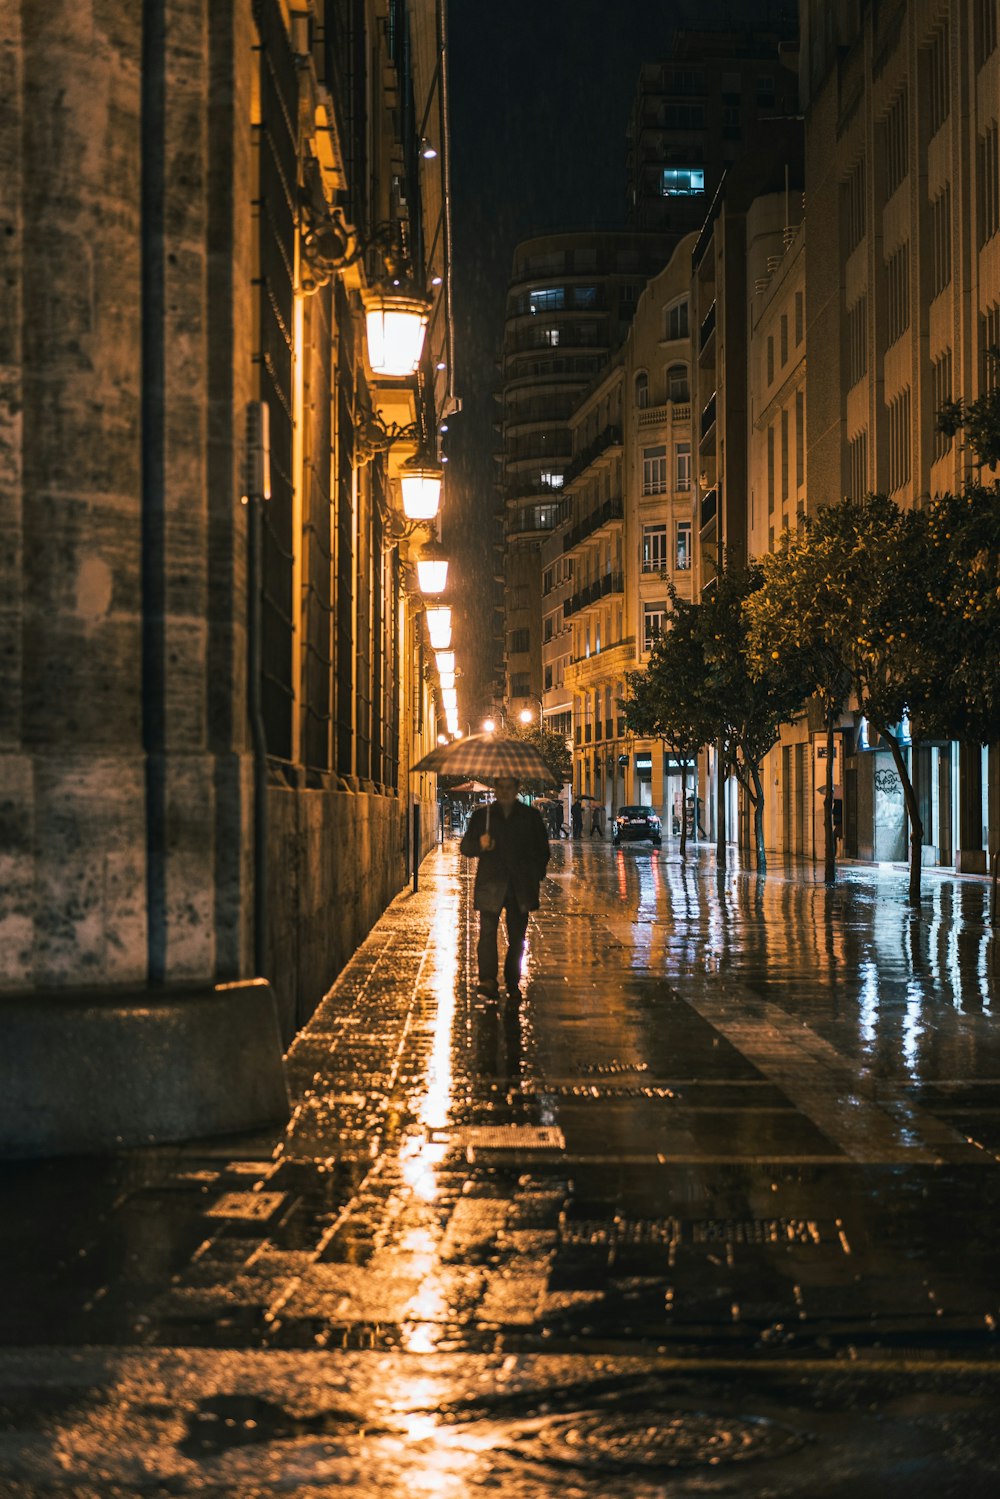 person with umbrella walking on street